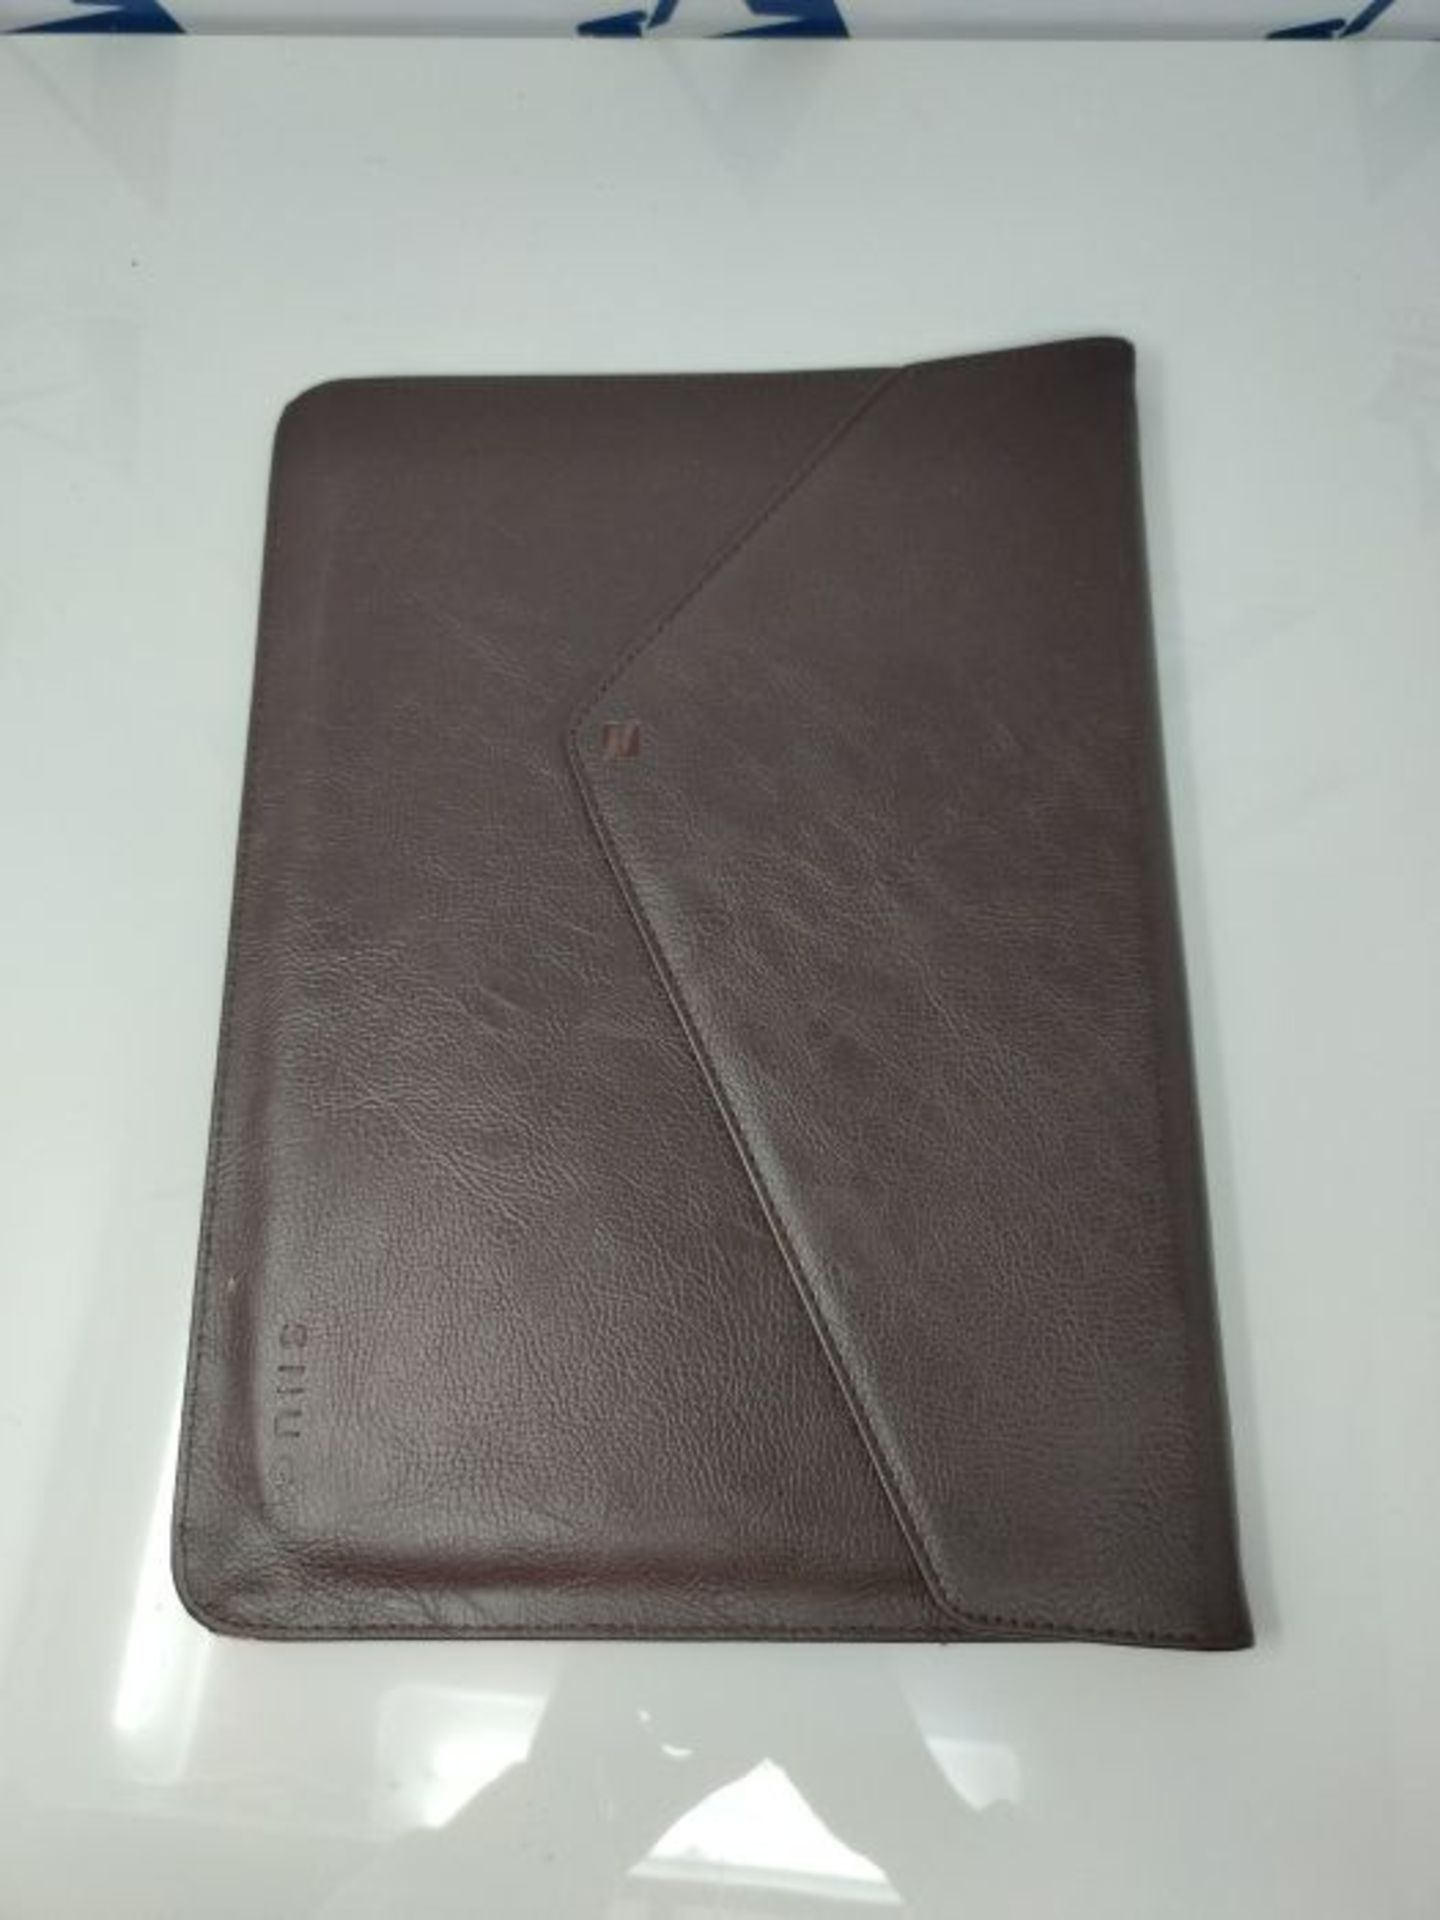 Snugg Macbook Pro Touch 13" (2016, 2017) Sleeve, Dark-Roast Brown Leather Sleeve Case - Image 2 of 2